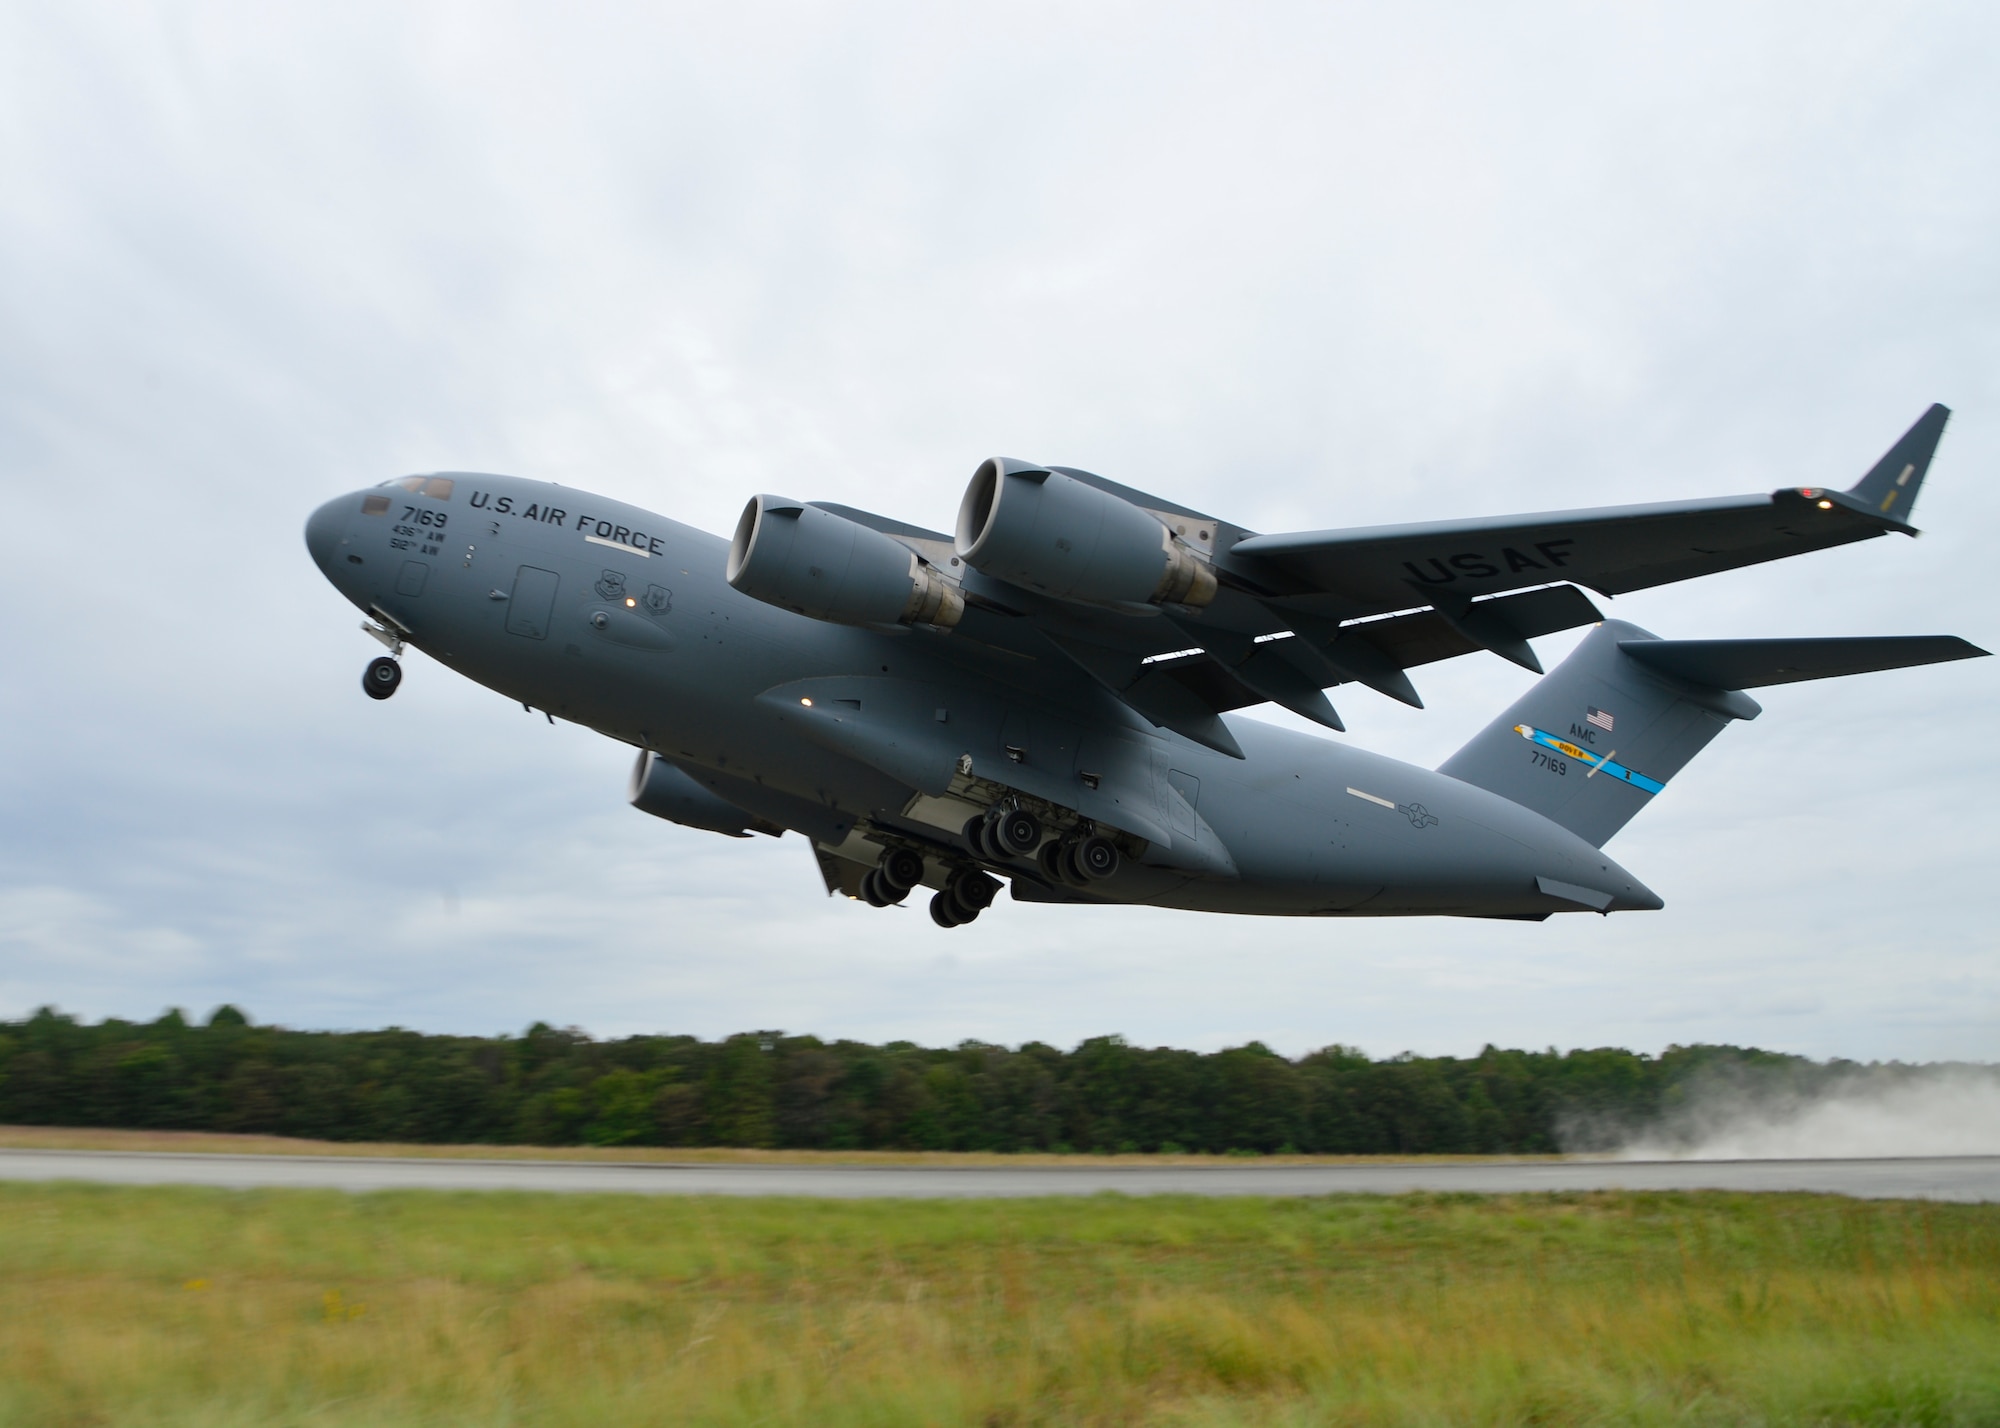 A C-17 Globemaster III takes off from an assault strip during semi-prepared runway operations, or SPRO training Sept. 24, 2014, at Fort A.P. Hill, Va. The C-17 aircraft is able to take-off and land with a full payload in as little as 3,000 feet. (U.S. Air Force photo/Airman 1st Class William Johnson)